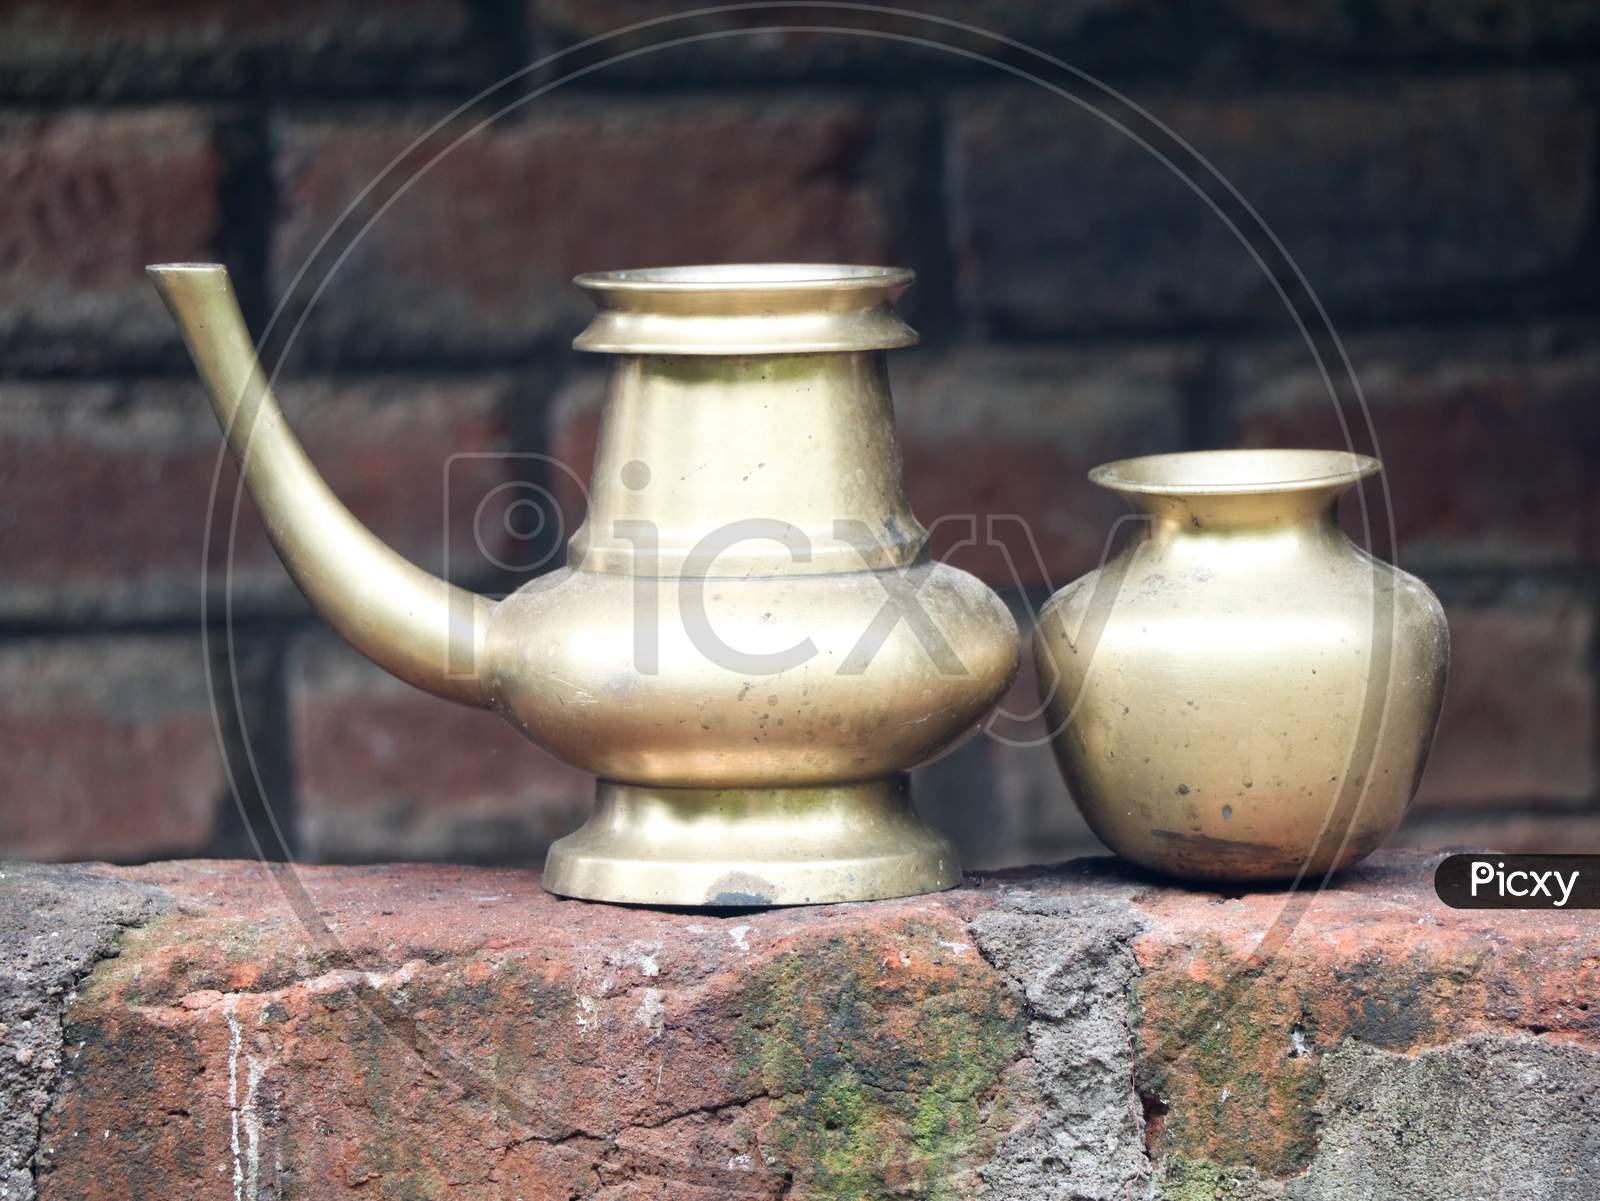 Kindi And Montha  Traditional Bronze Vessels  Used In Kerala For Holding Water